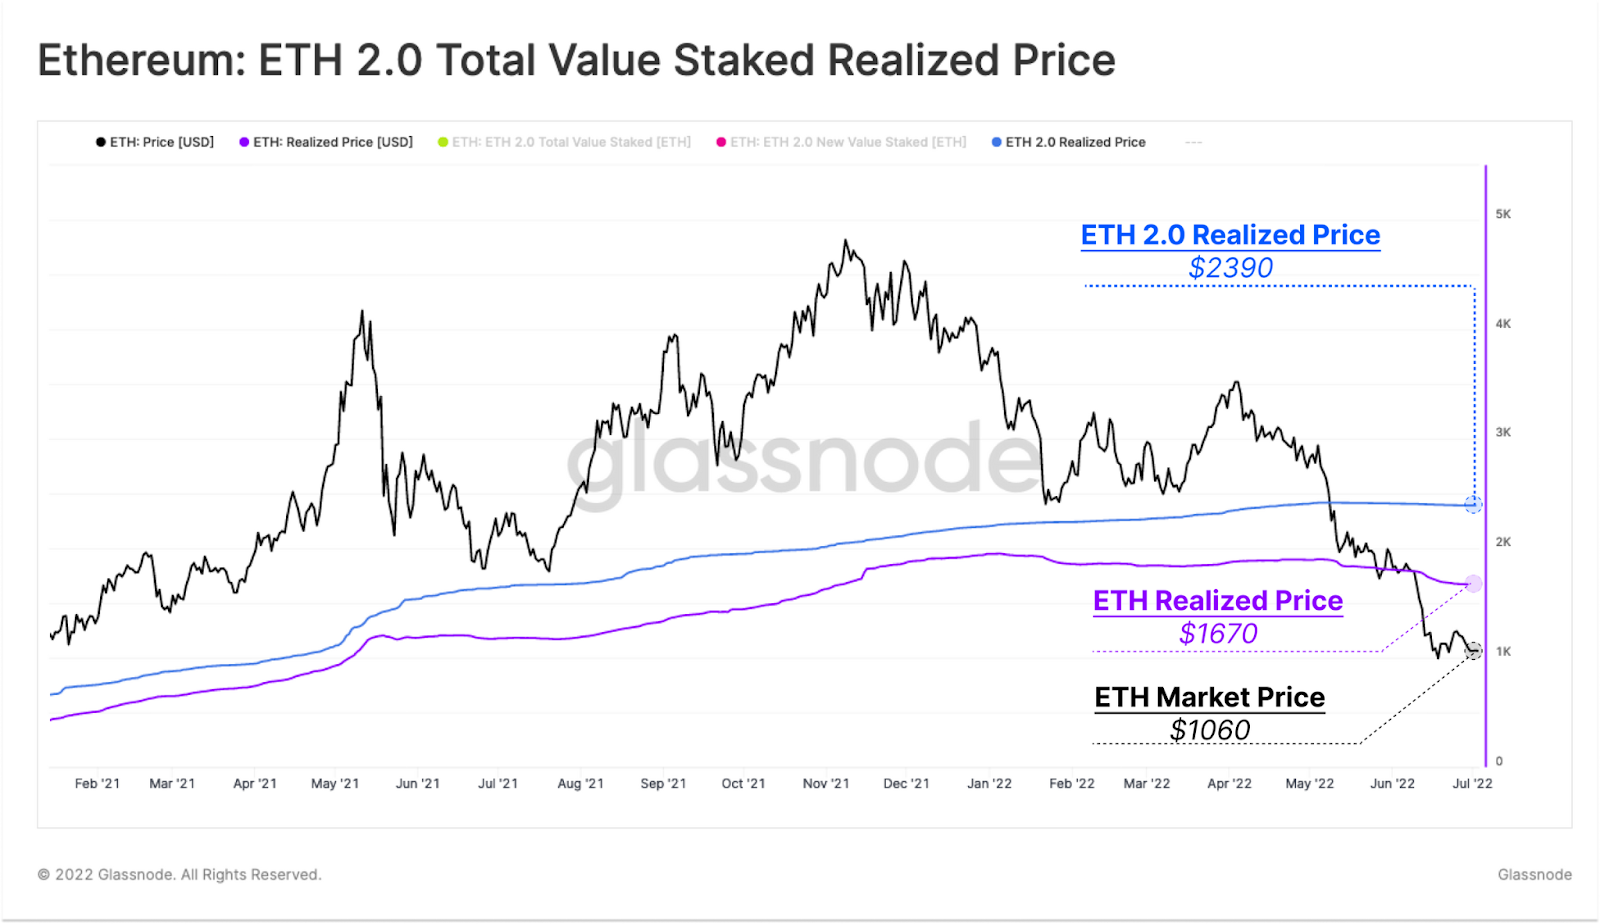 Ethereum (ETH) Stakeholders React |  ETH 2.0 Total Value Staked Realized price, July 2022 